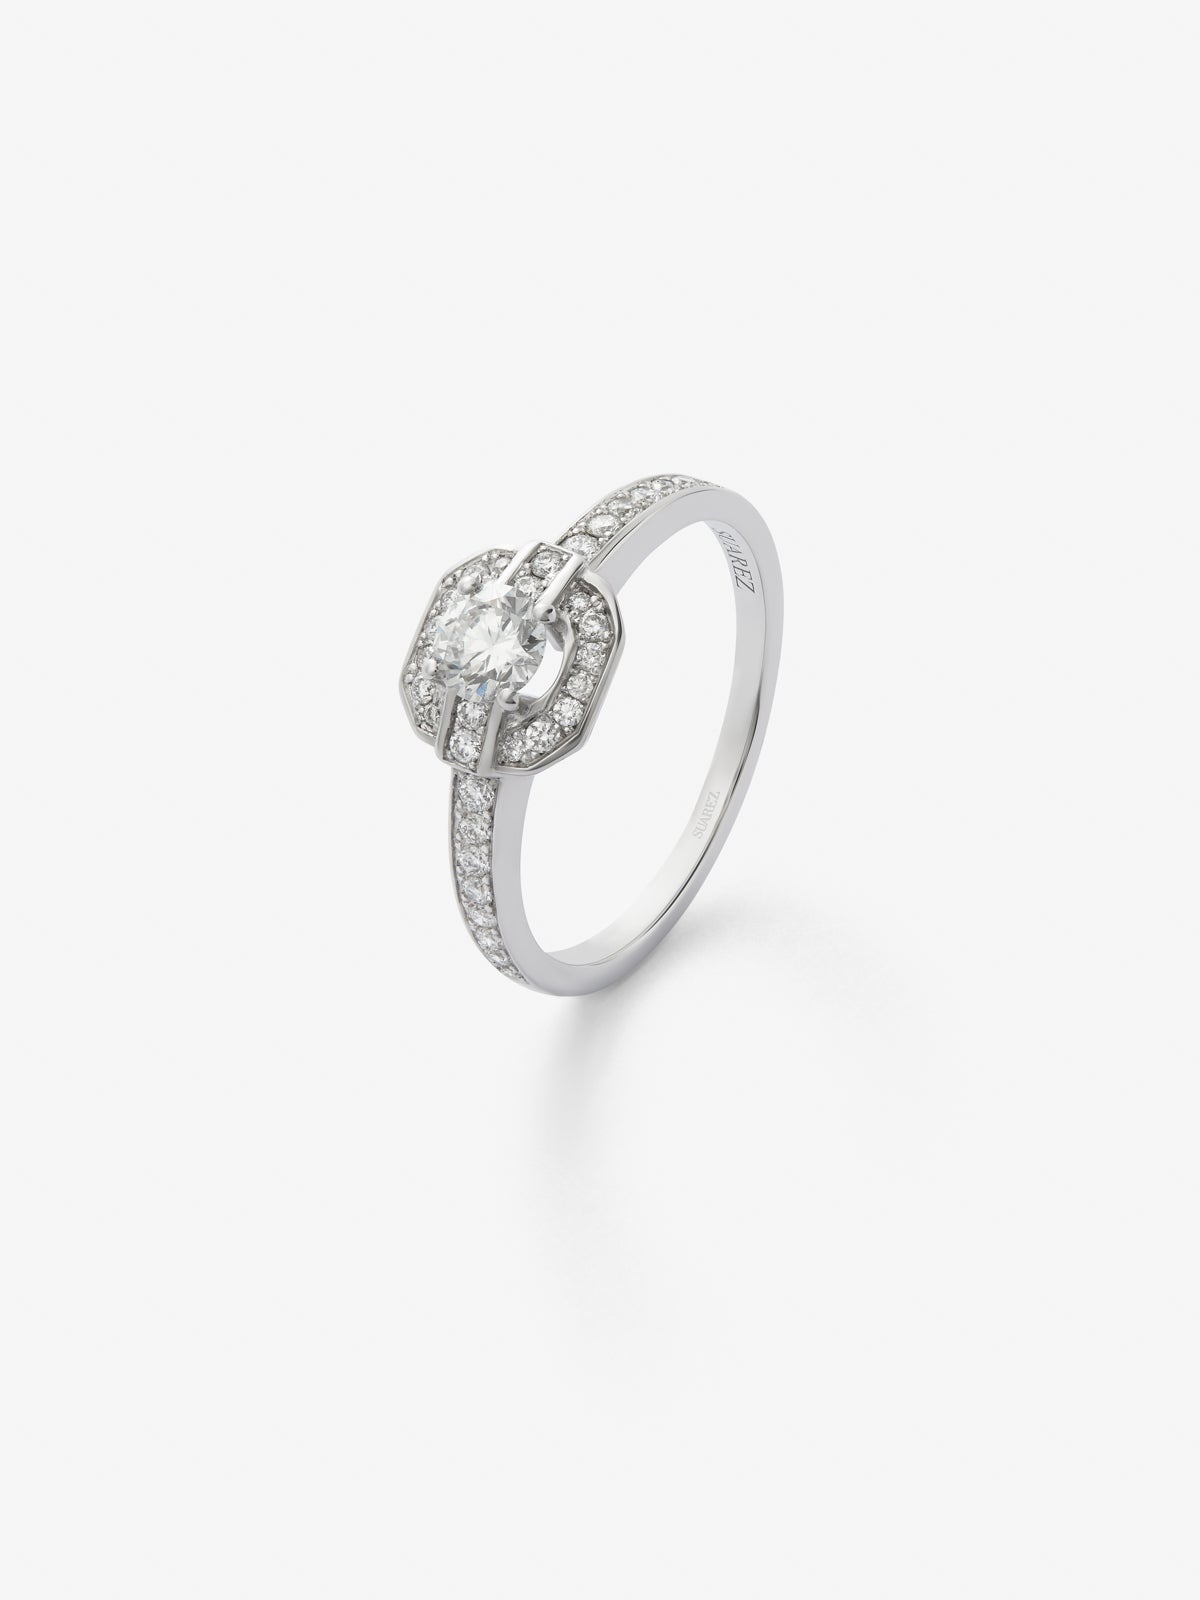 18K white gold ring with central brilliant-cut diamond of 0.3 cts and border and arm of 34 brilliant-cut diamonds with a total of 0.22 cts